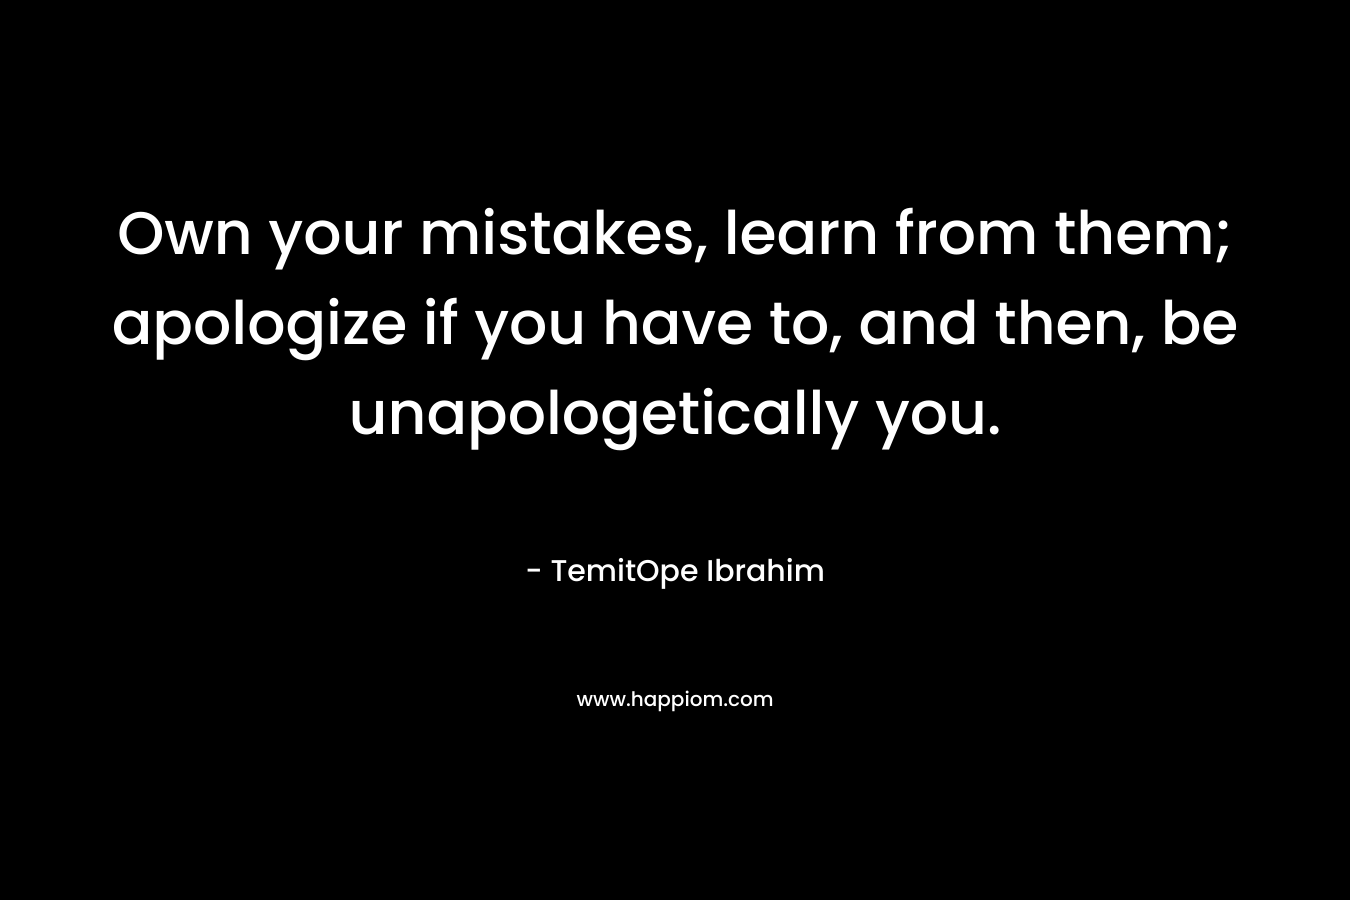 Own your mistakes, learn from them; apologize if you have to, and then, be unapologetically you. – TemitOpe Ibrahim